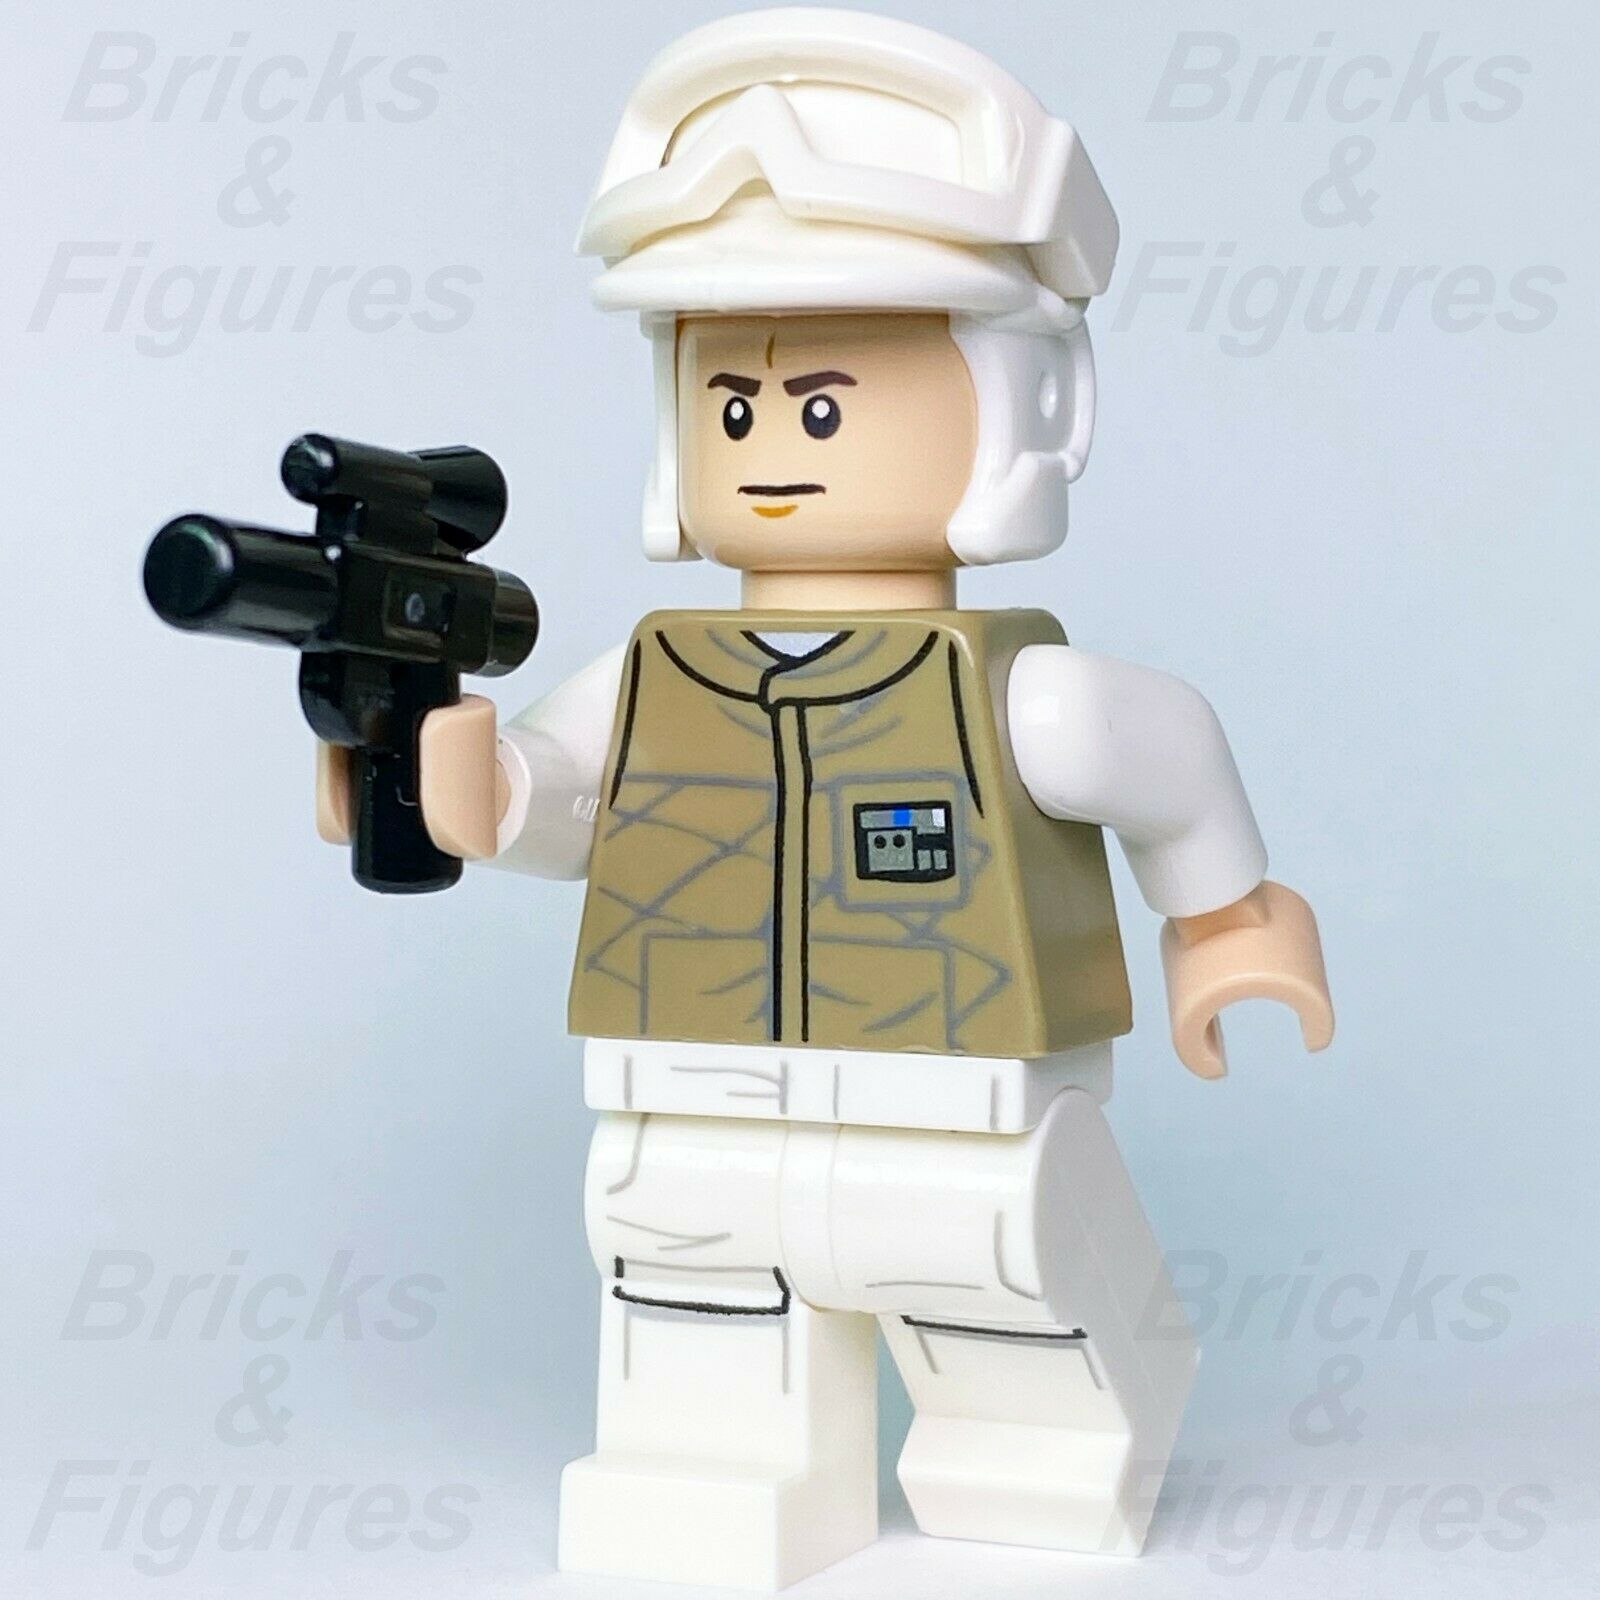 New Star Wars LEGO Hoth Rebel Alliance Trooper with Frown TESB Minifigure 75098 - Bricks & Figures